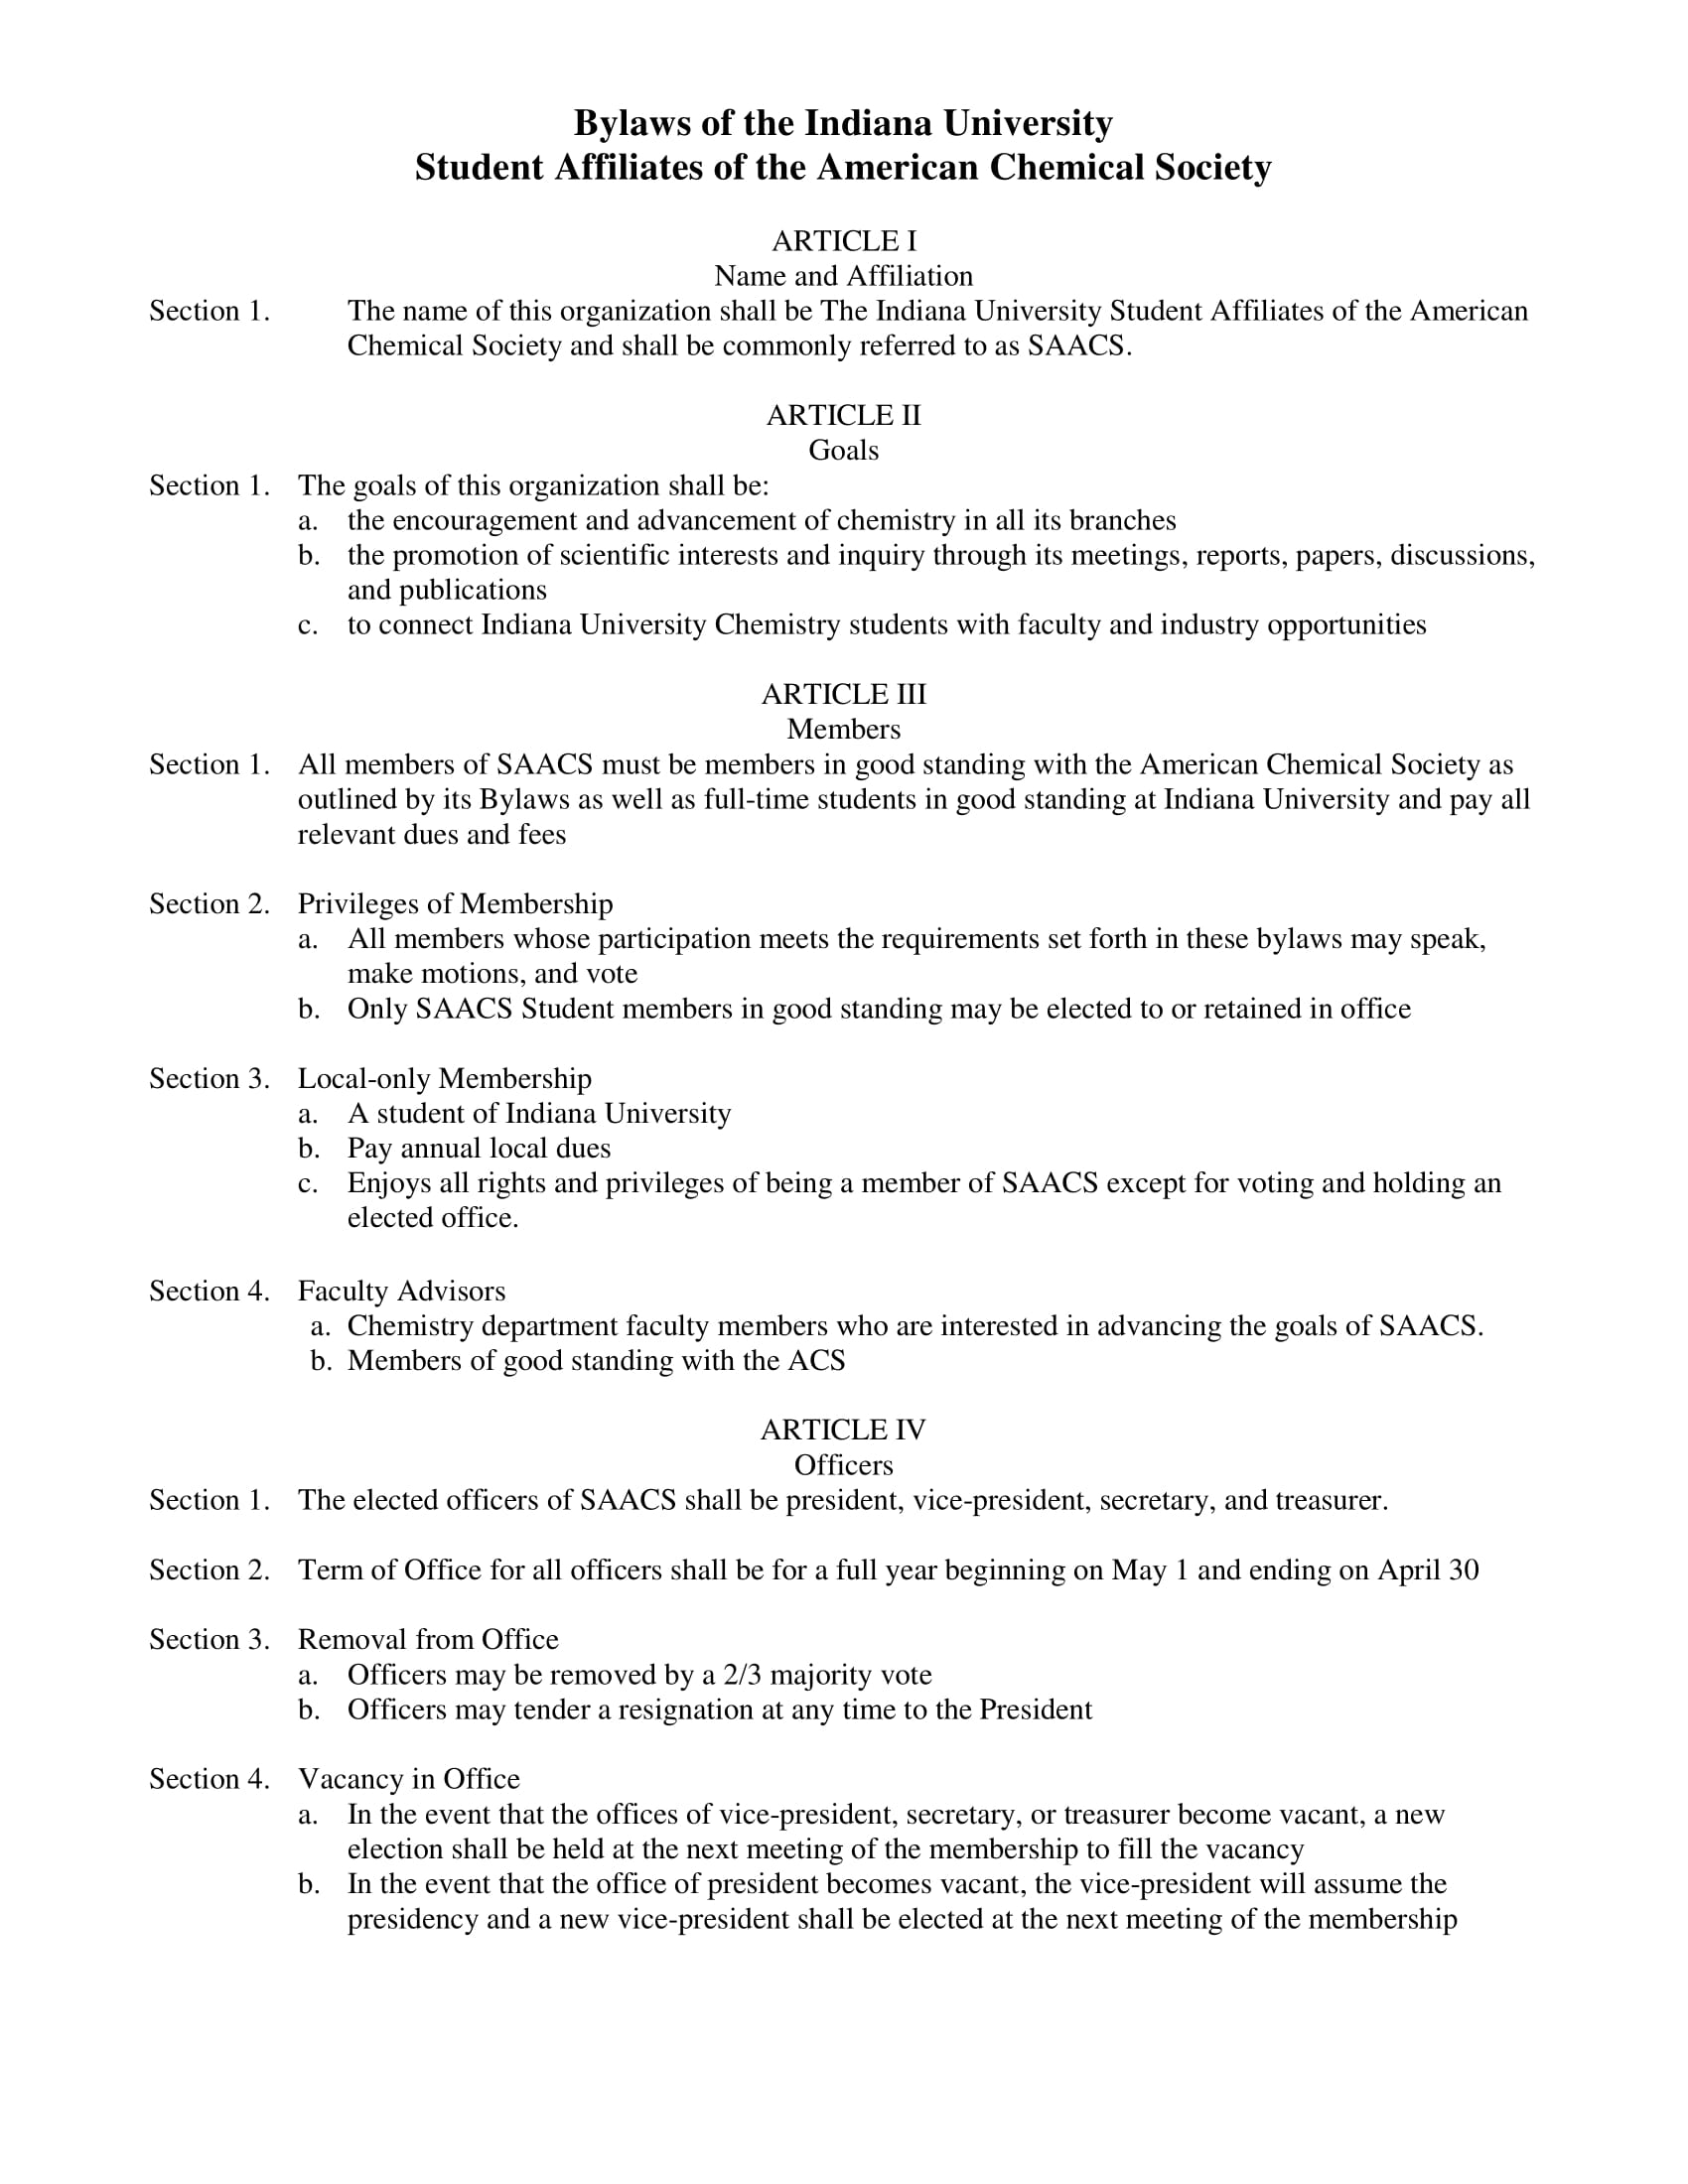 university science club bylaw template